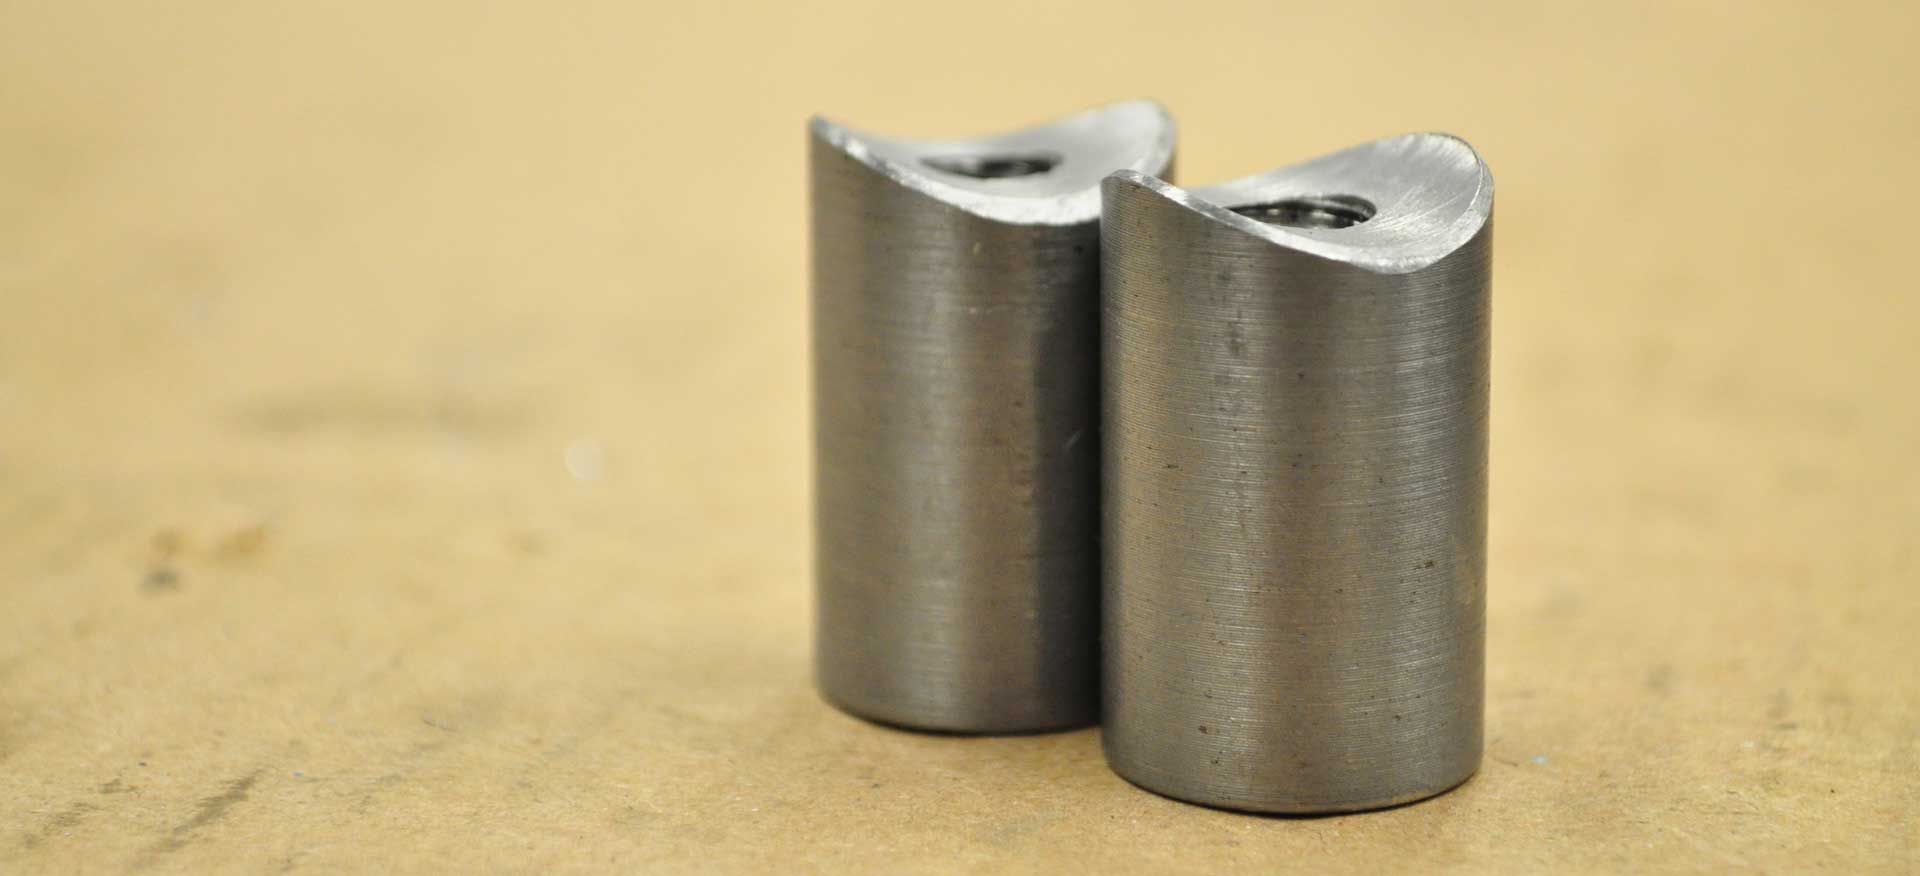 Two threaded bungs sitting together